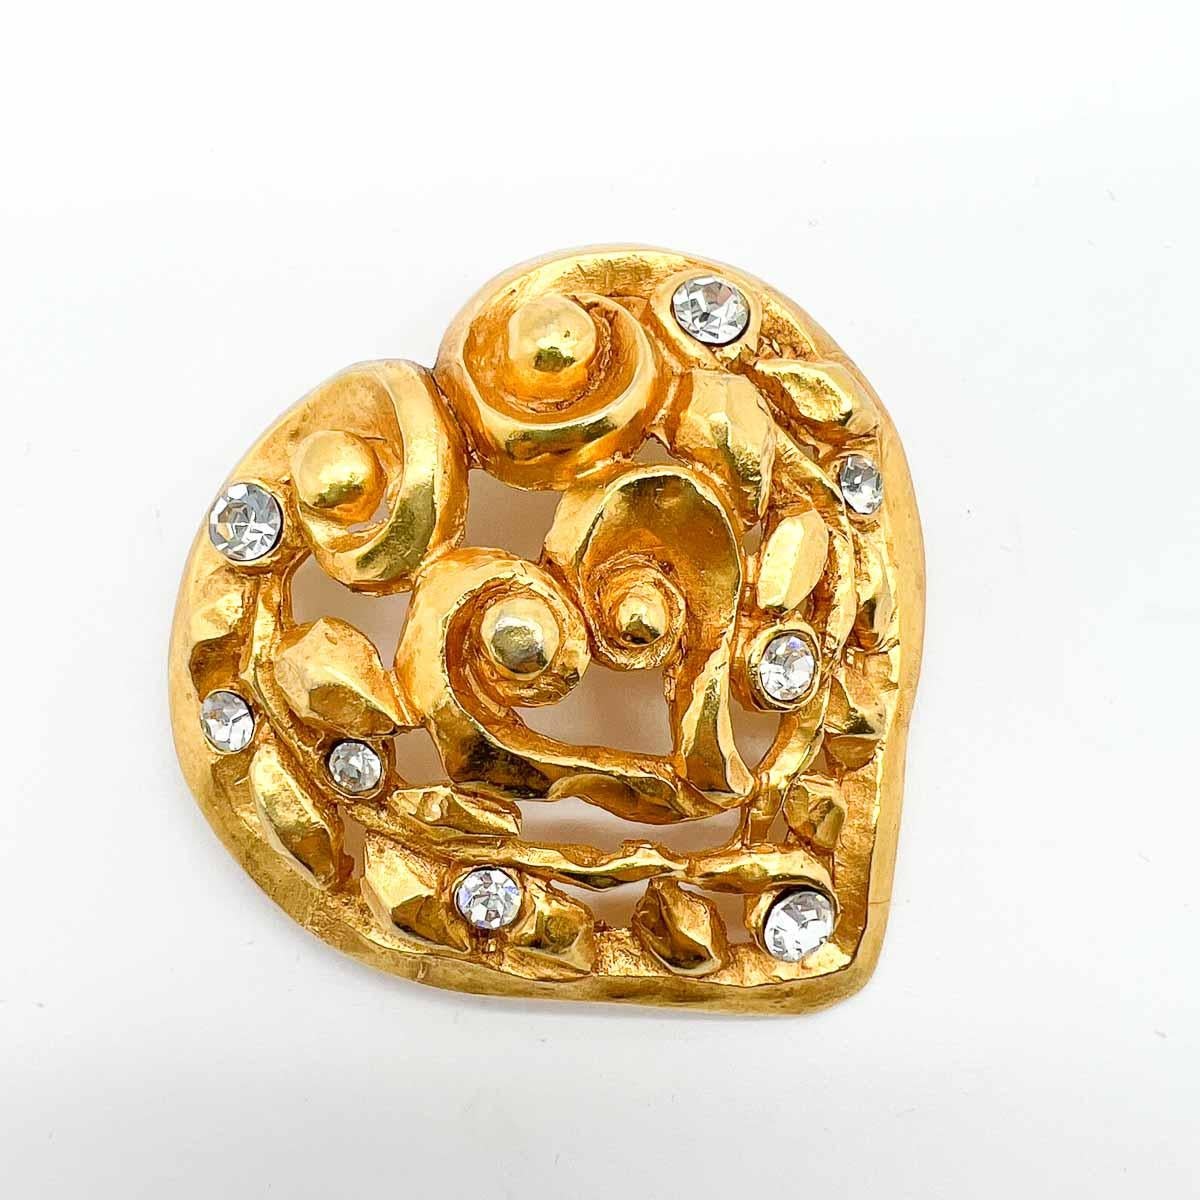 An iconic piece of fashion history, a Vintage Christian Lacroix Heart Brooch, a limited edition piece designed for Noel 1991. Statement in scale this beauty if exquisitely crafted and is a rare archive find.
Christian Lacroix established his own